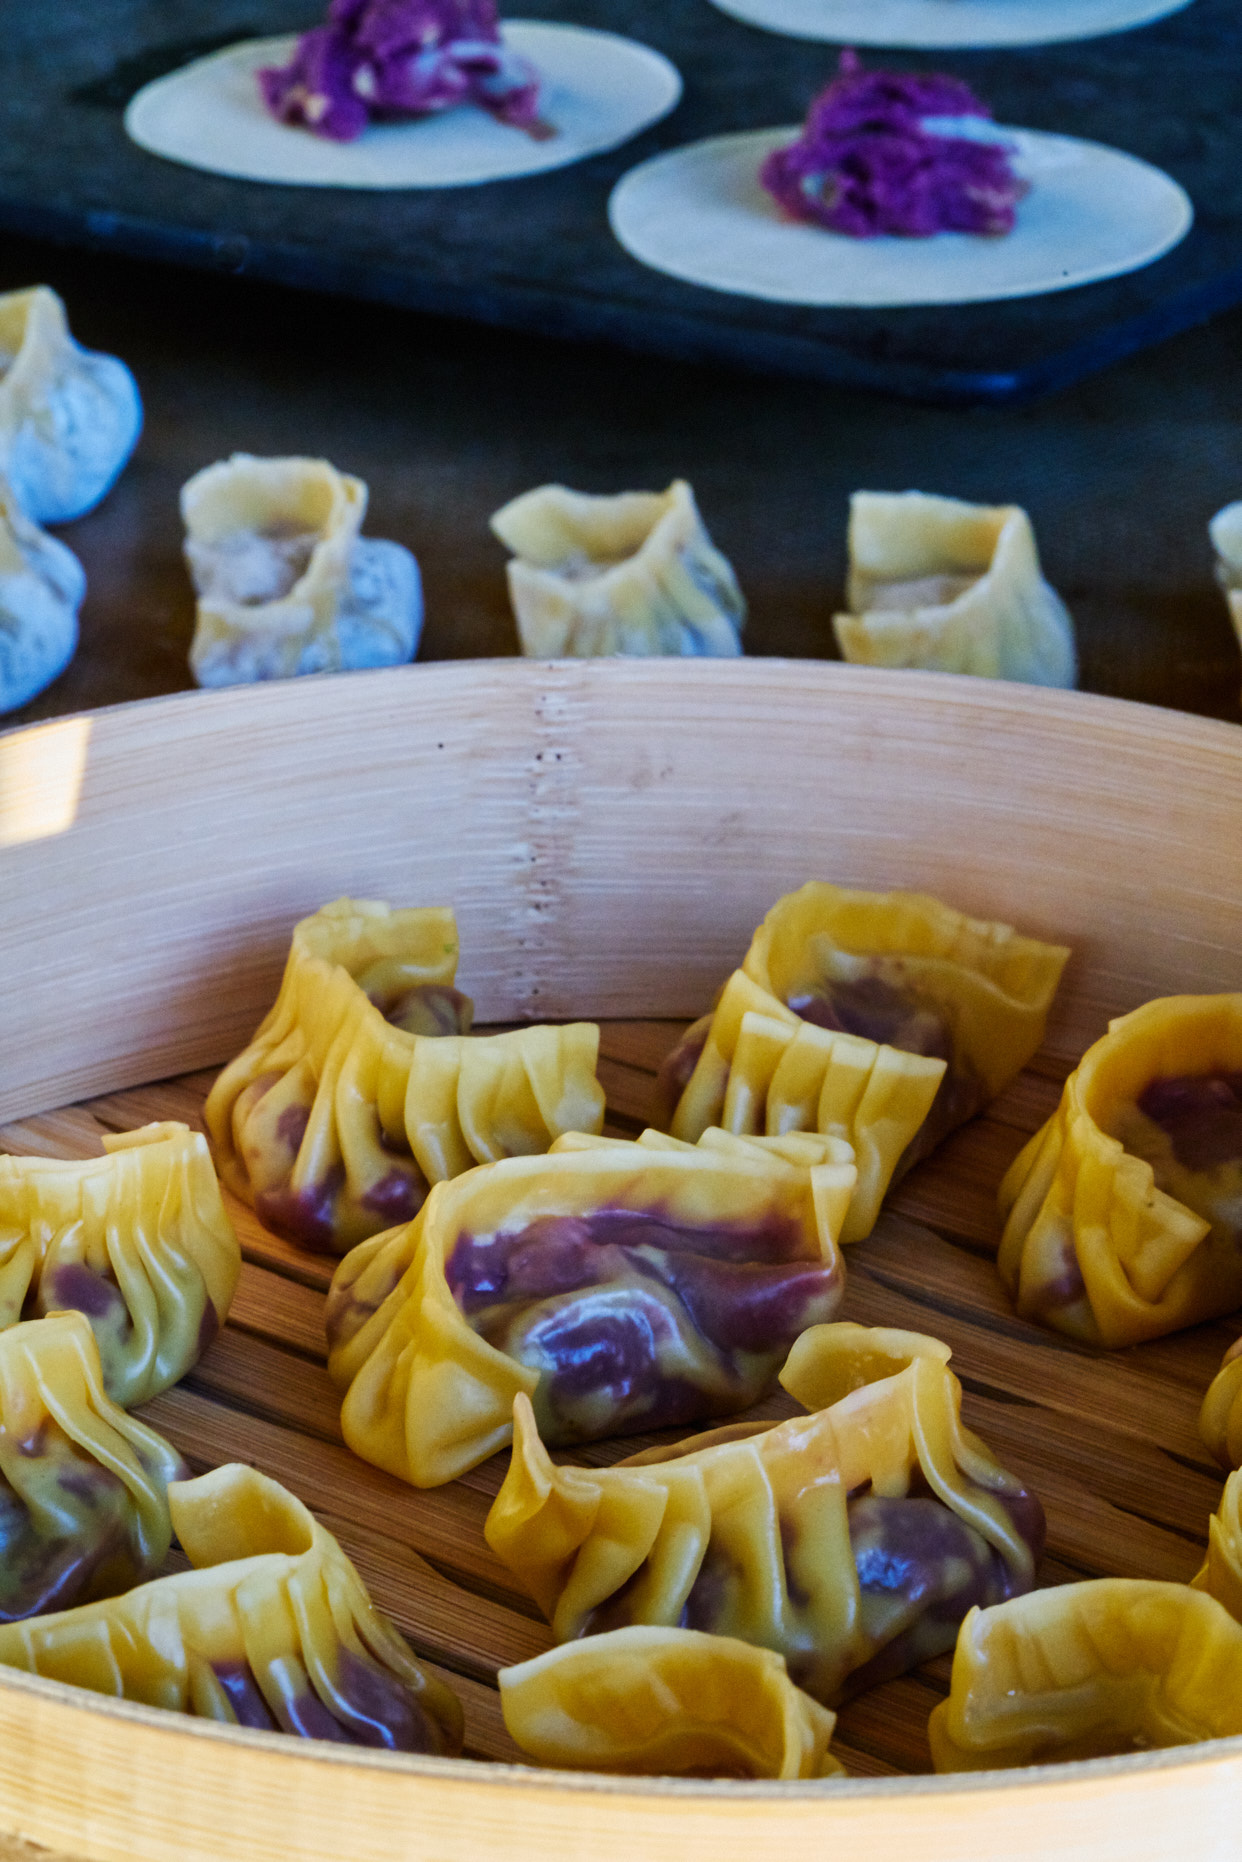 Purple dumplings in a bamboo steamer with uncooked dumplings in the background.